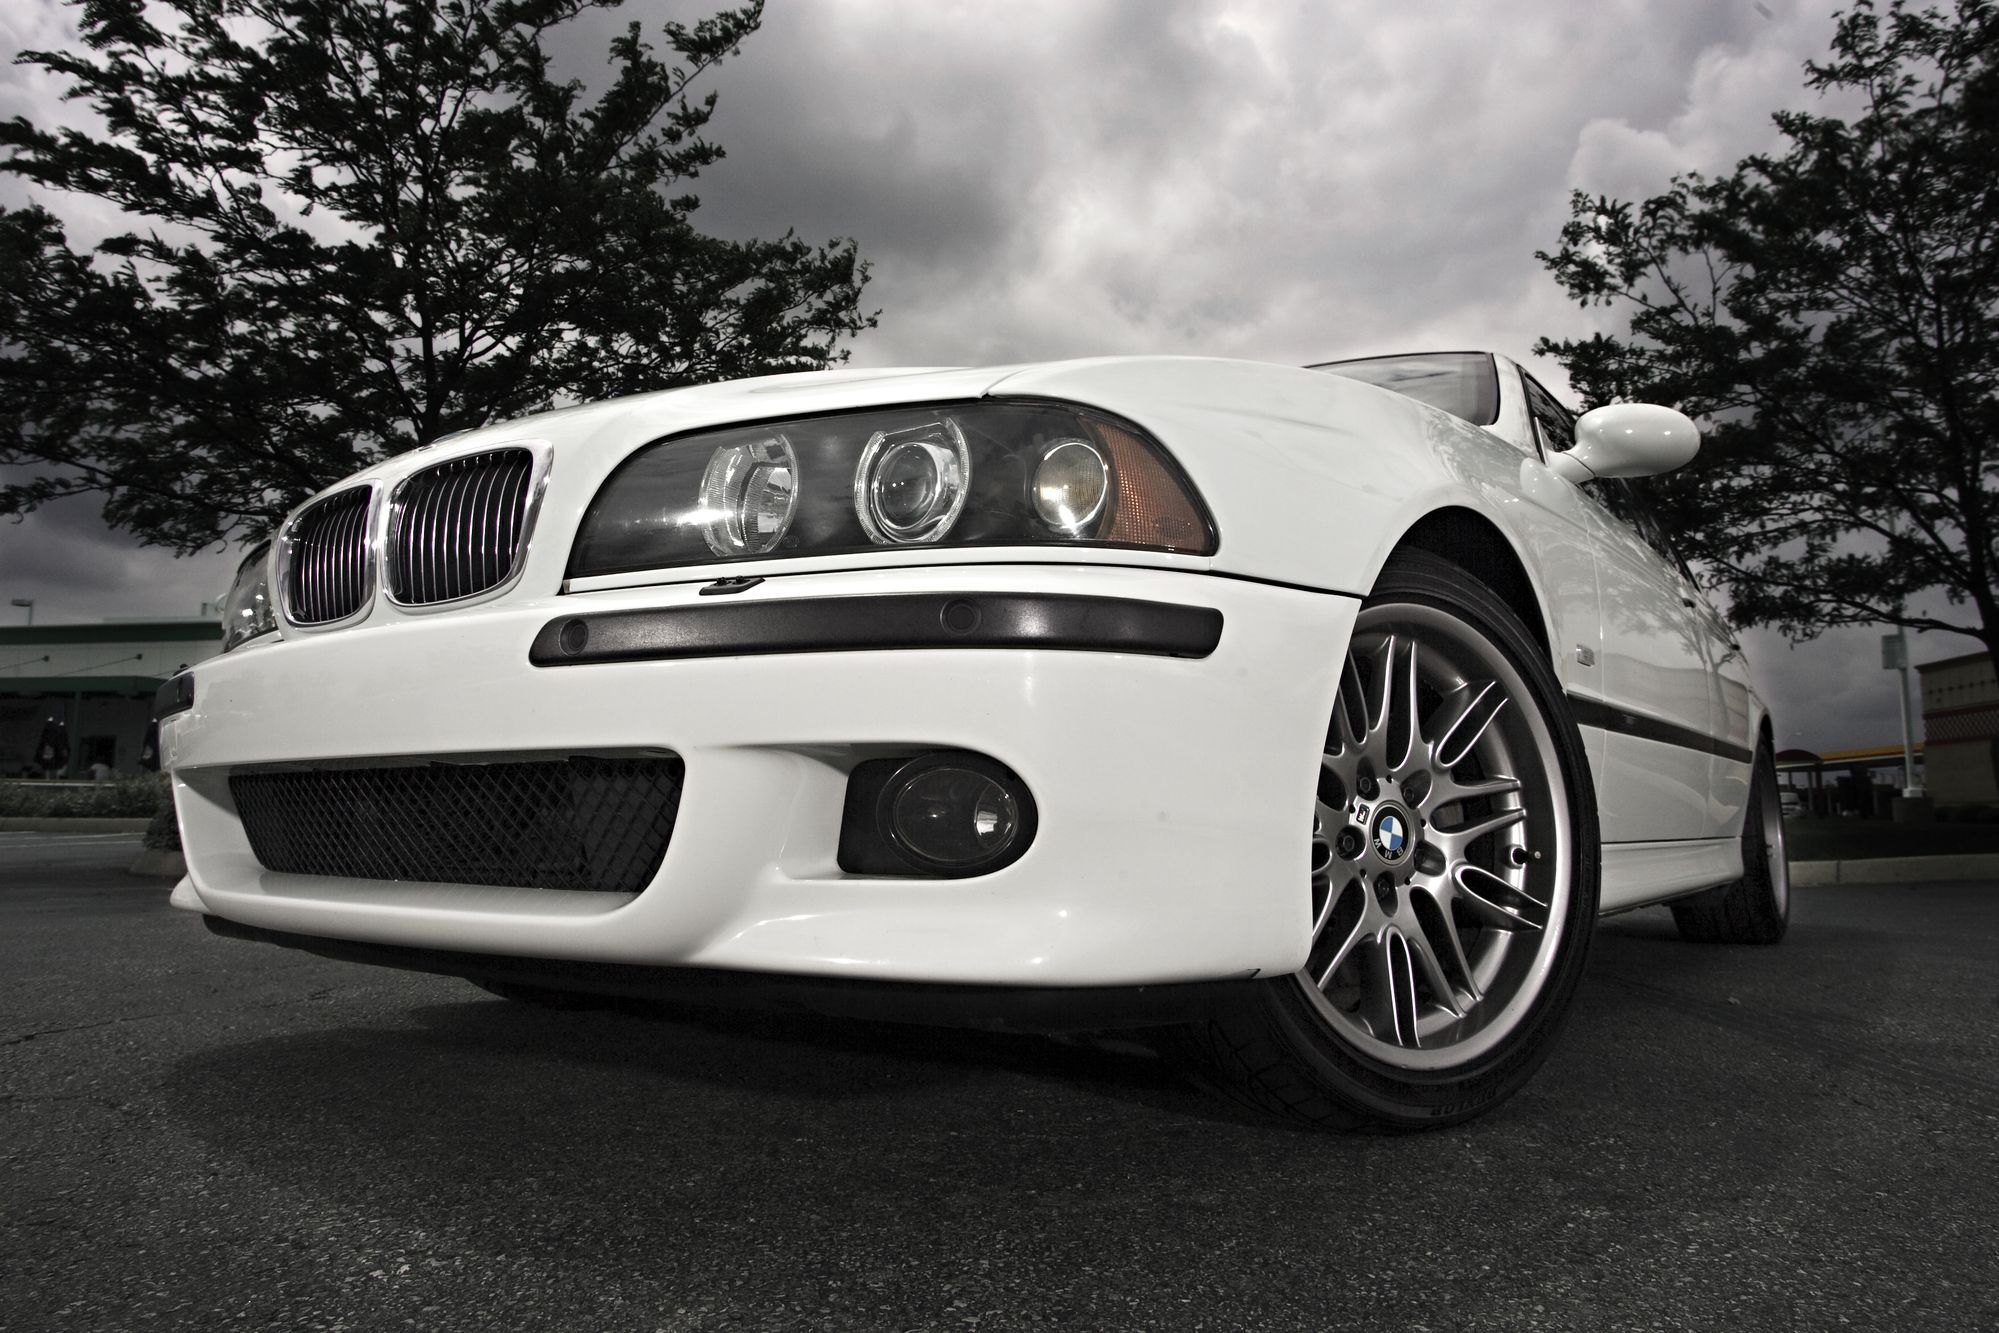 White BMW 5-Series with Aftermarket Headlights - Photo by dan kinzie